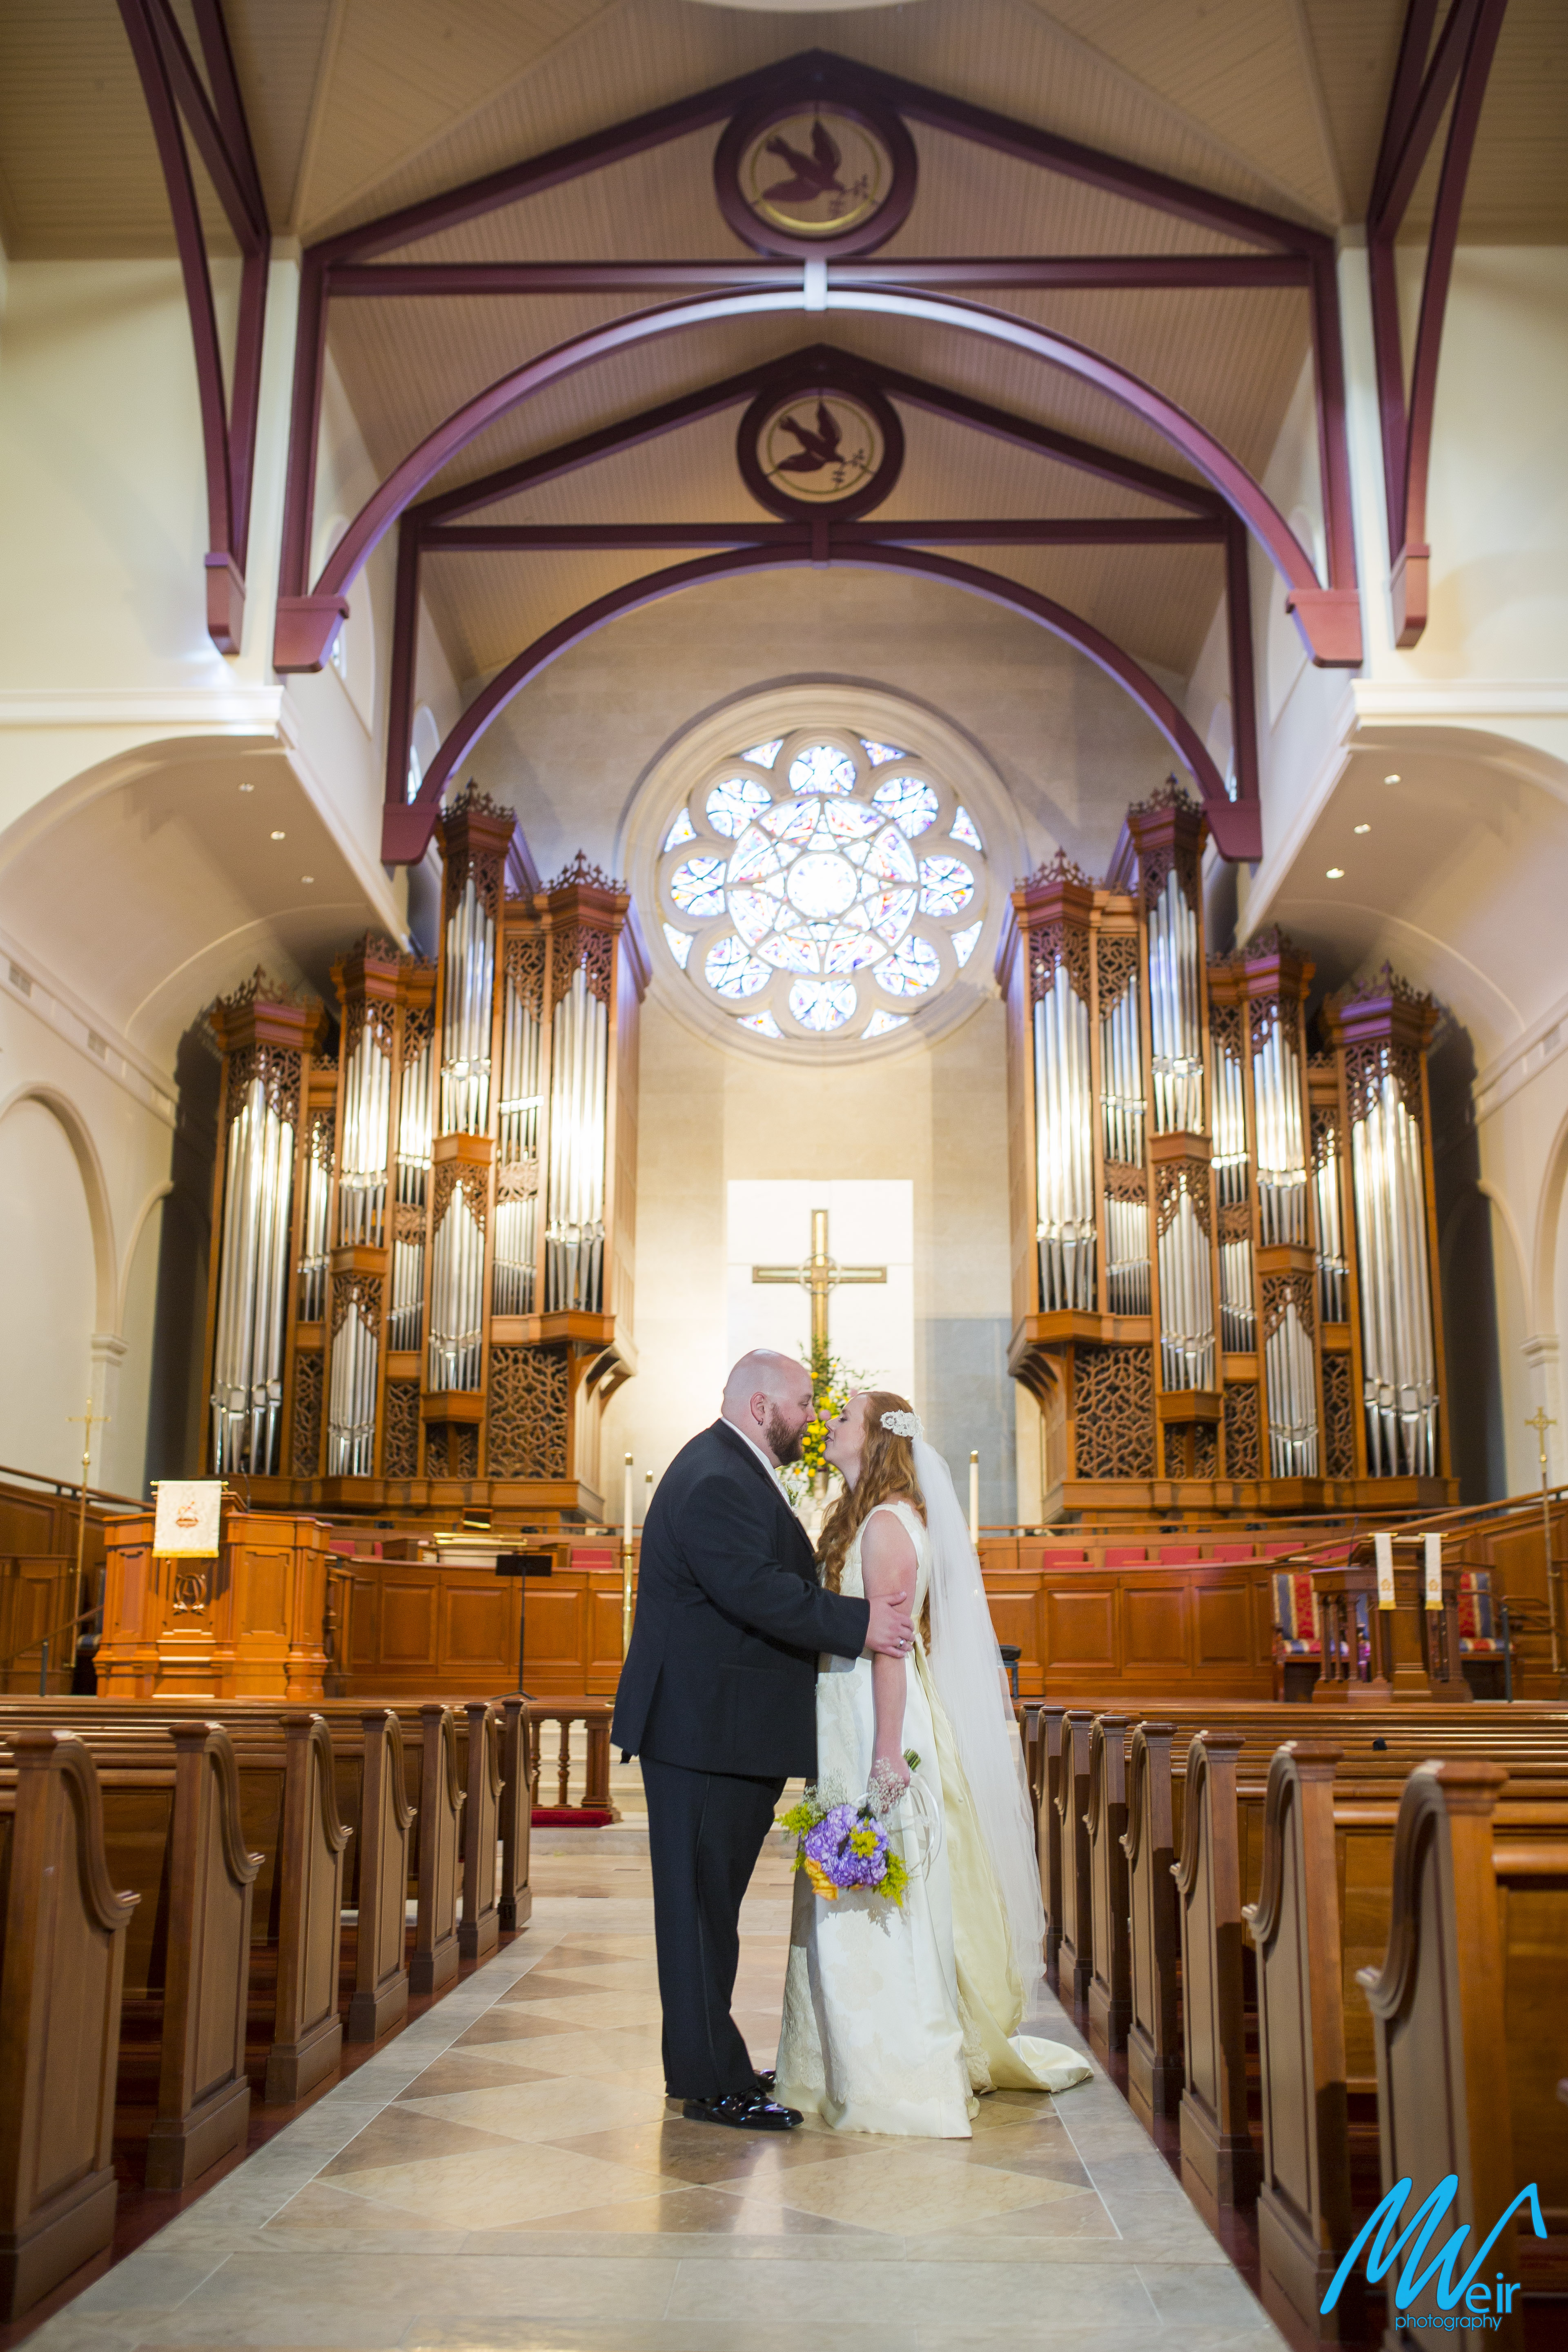 bride and groom stand in the aisle of church sanctuary